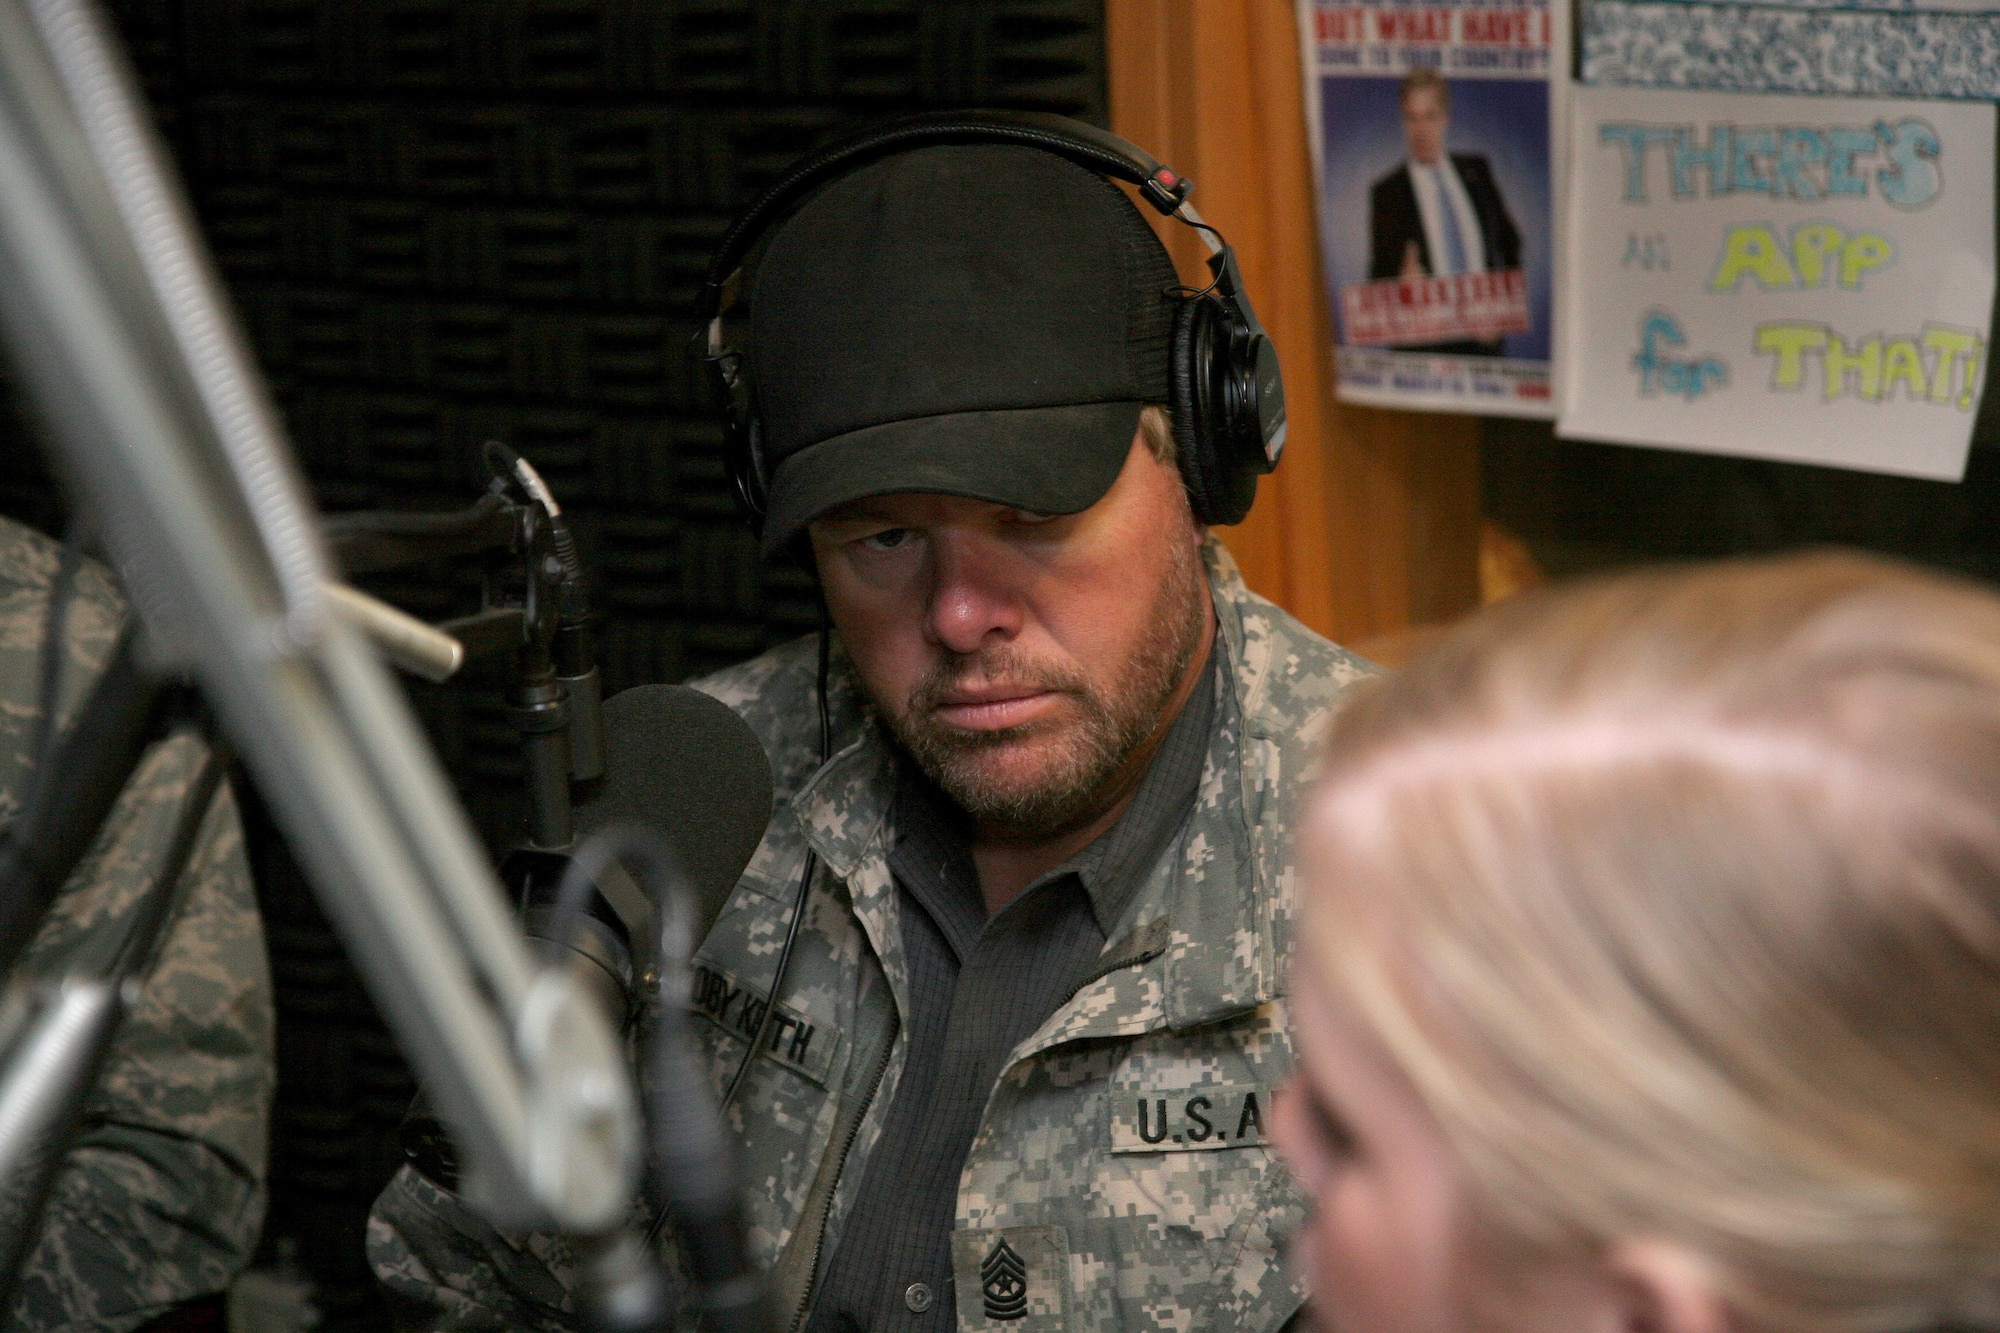 Country music superstar Toby Keith is interviewed by Senior Airman Caitlin Jones on American Forces Network Aviano's ZFM 106 morning show at Aviano Air Base, Italy April 29.  Mr. Keith just returned from Afghanistan where he was entertaining the troops on his USO sponsored "America's Toughest Tour 2009".  He stopped by Aviano before continuing the tour with a concert at Camp Darby, Italy, April 29 and U.S. Army Garrison Vicenza, Italy April 30.  (U.S. Air Force photo/Senior Master Sgt. Robert W. Valenca) 